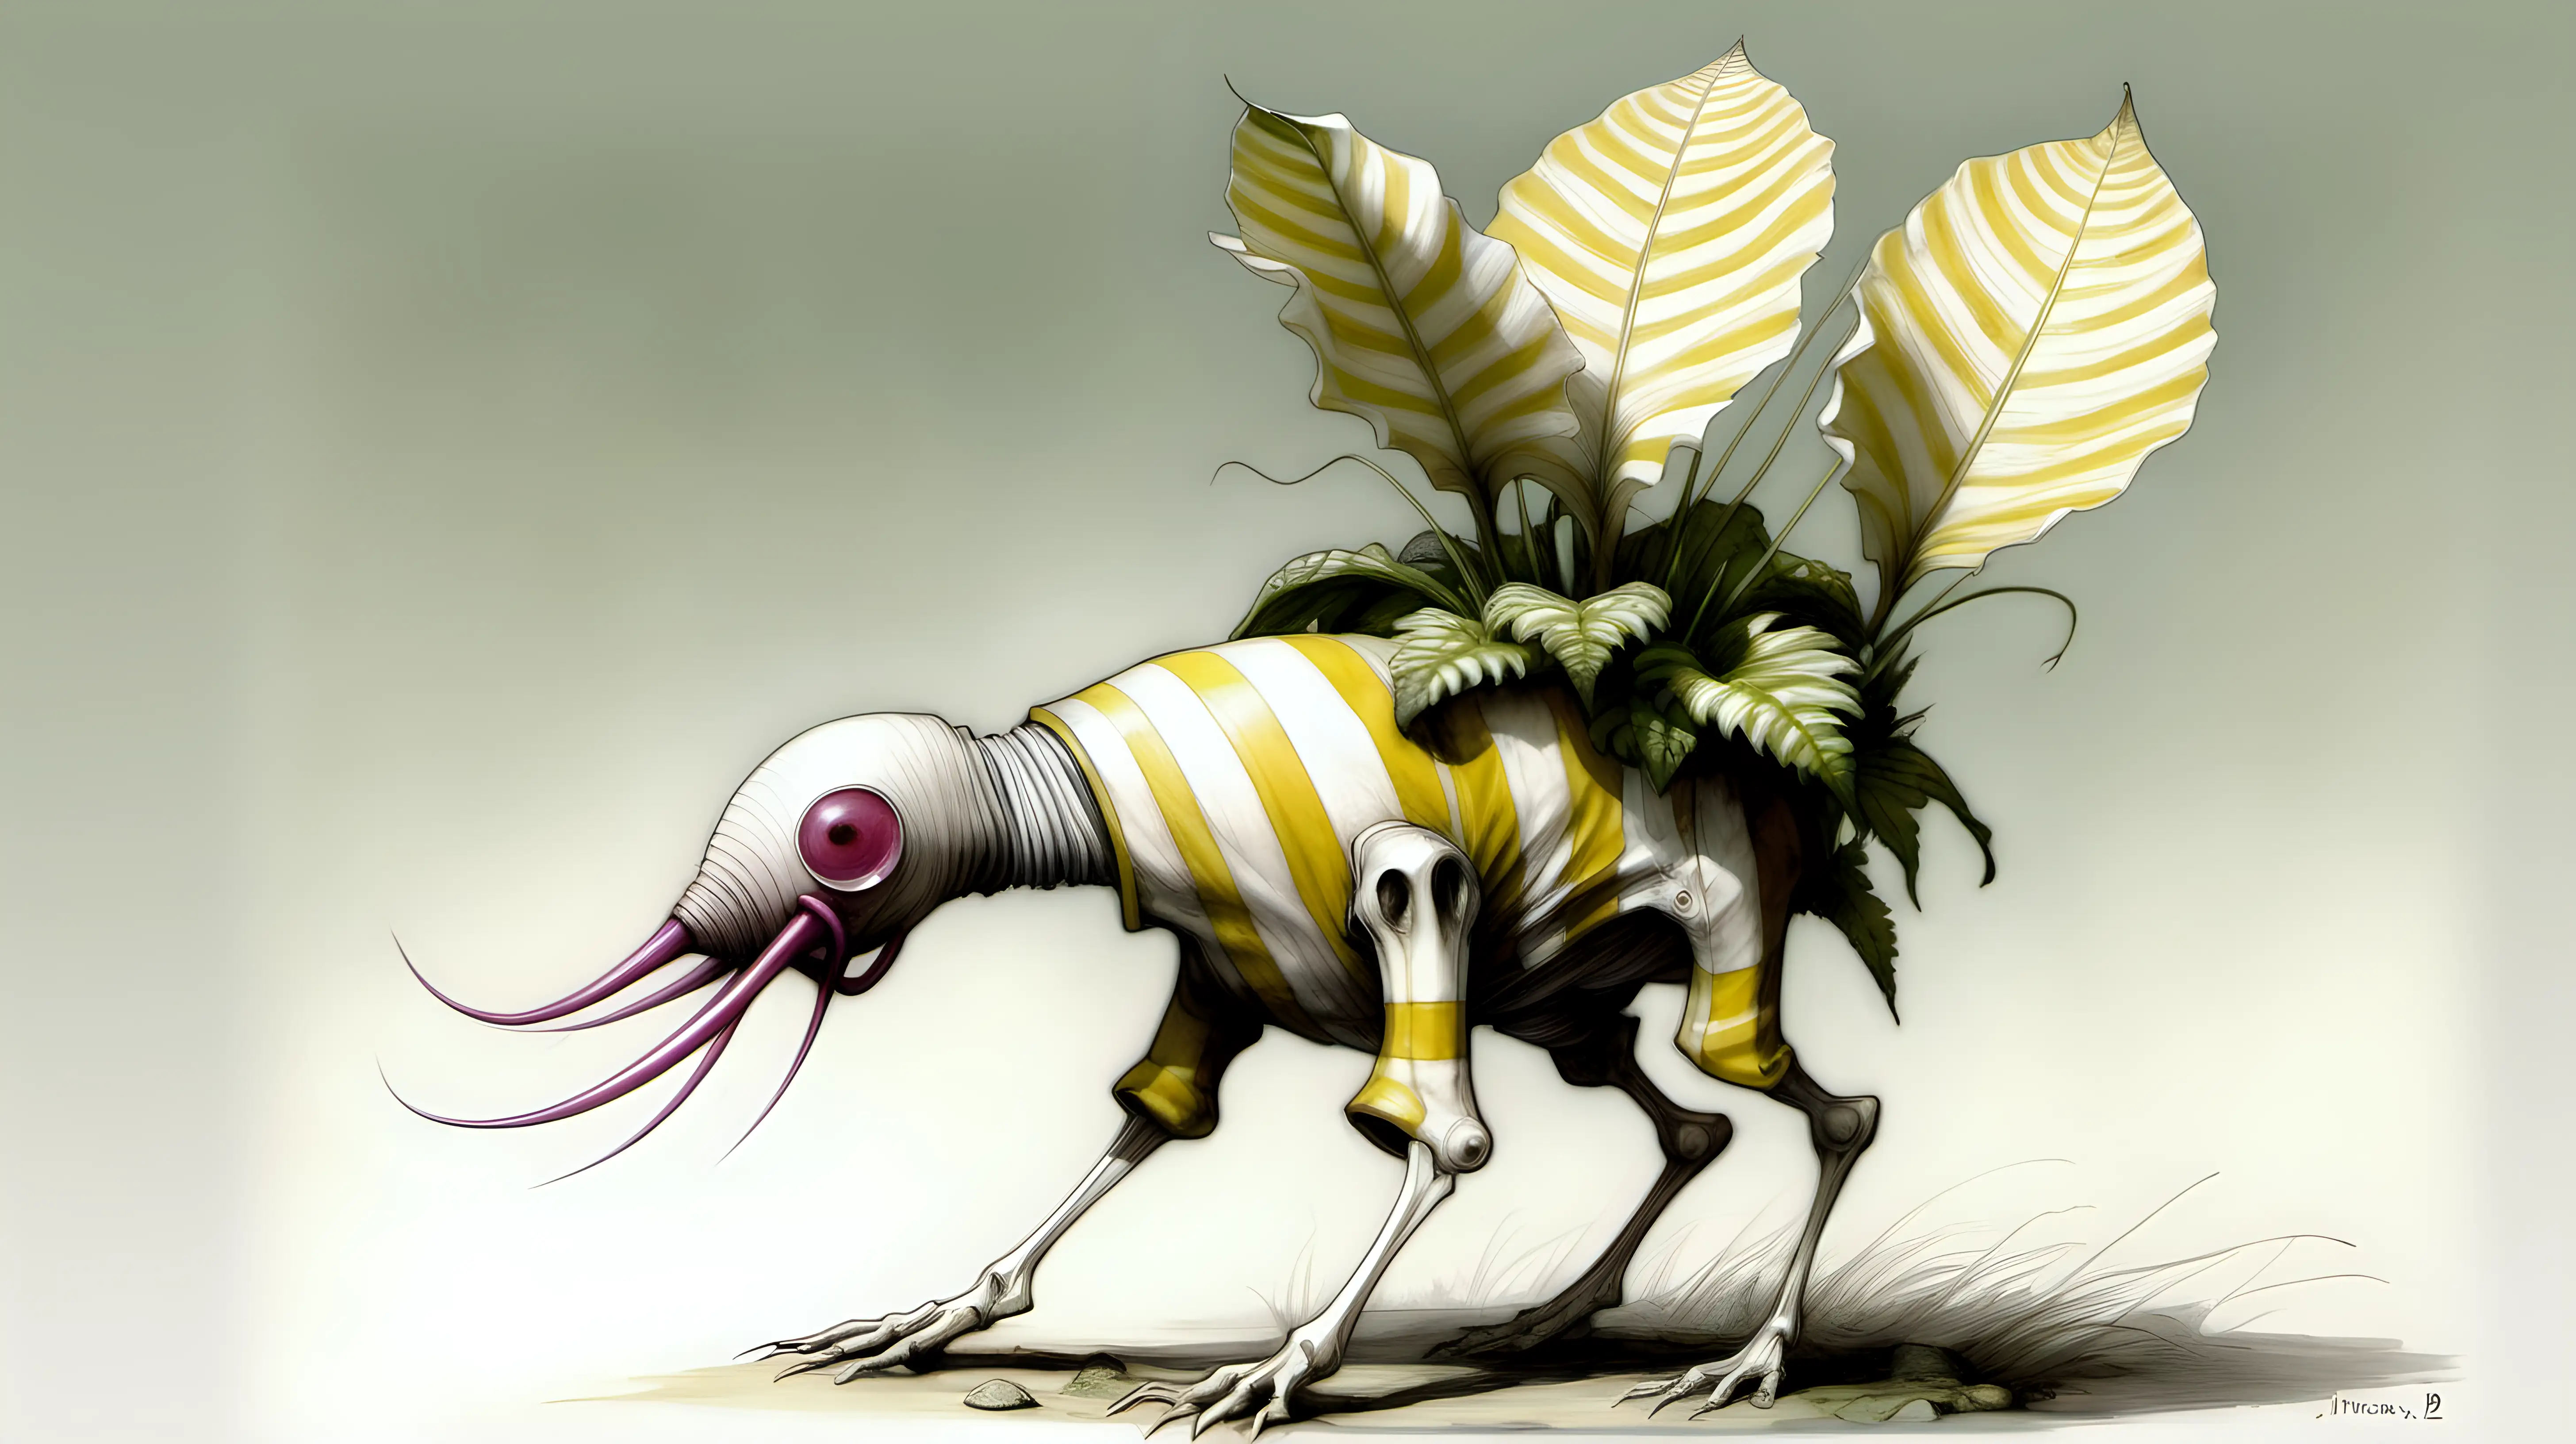 Fantasy Creature in JeanBaptiste Monge Style with CyclamenFernShaped Bonestructure and YellowWhite Striped Fur